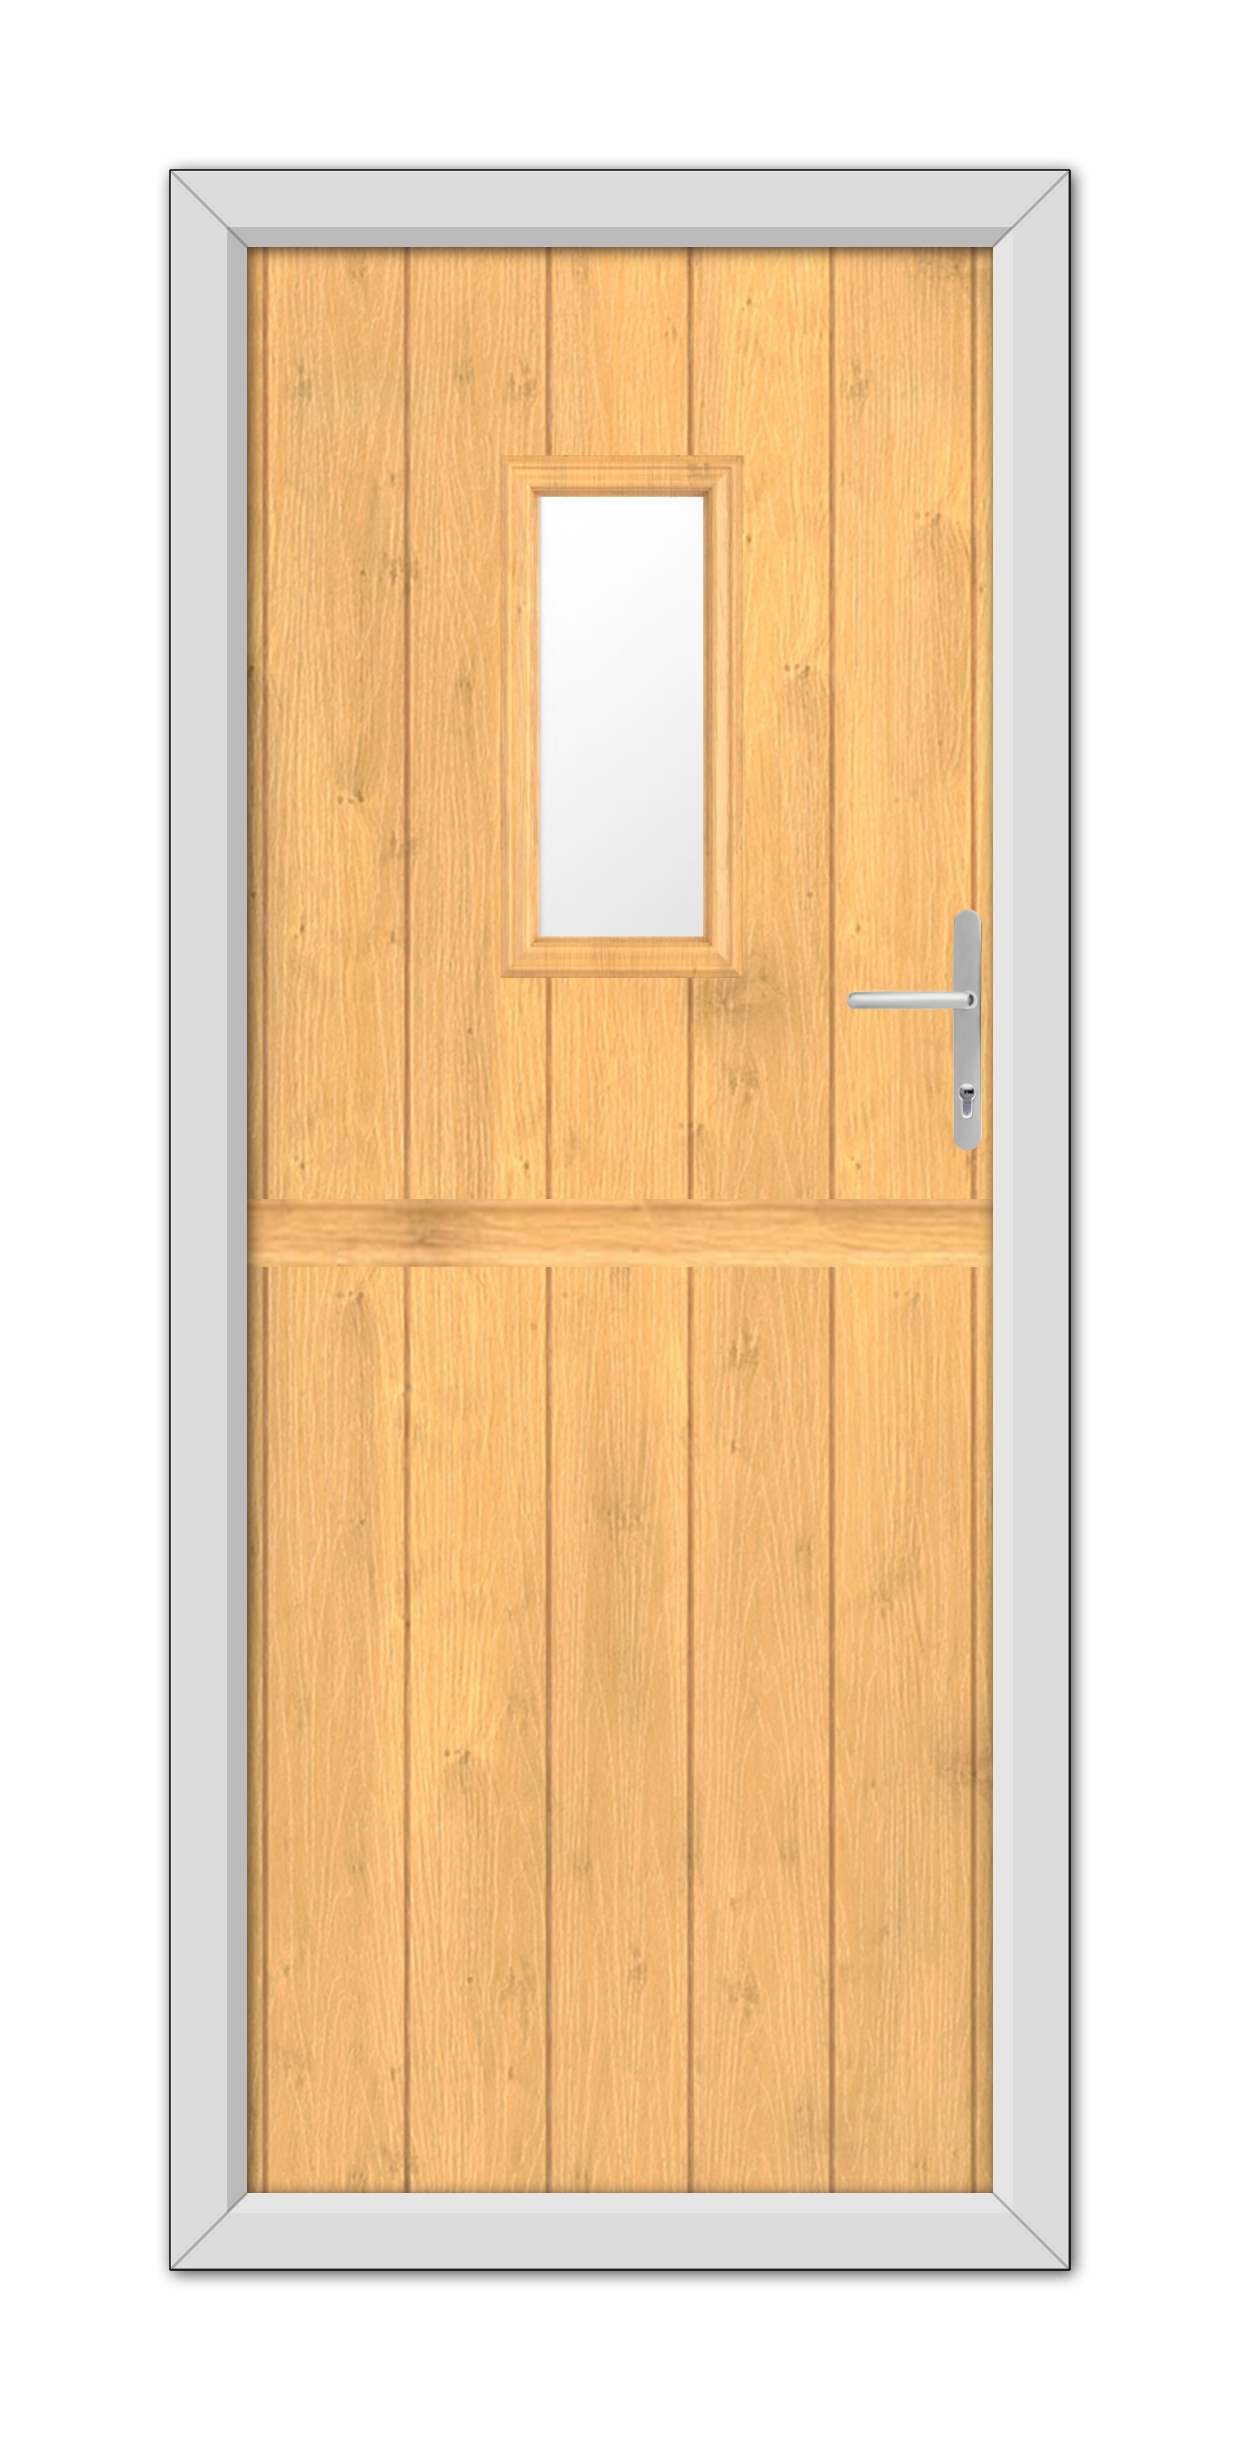 An Irish Oak Somerset Stable Composite Door 48mm Timber Core with a small square window at the top, set within a gray frame, featuring a metallic handle on the right side.